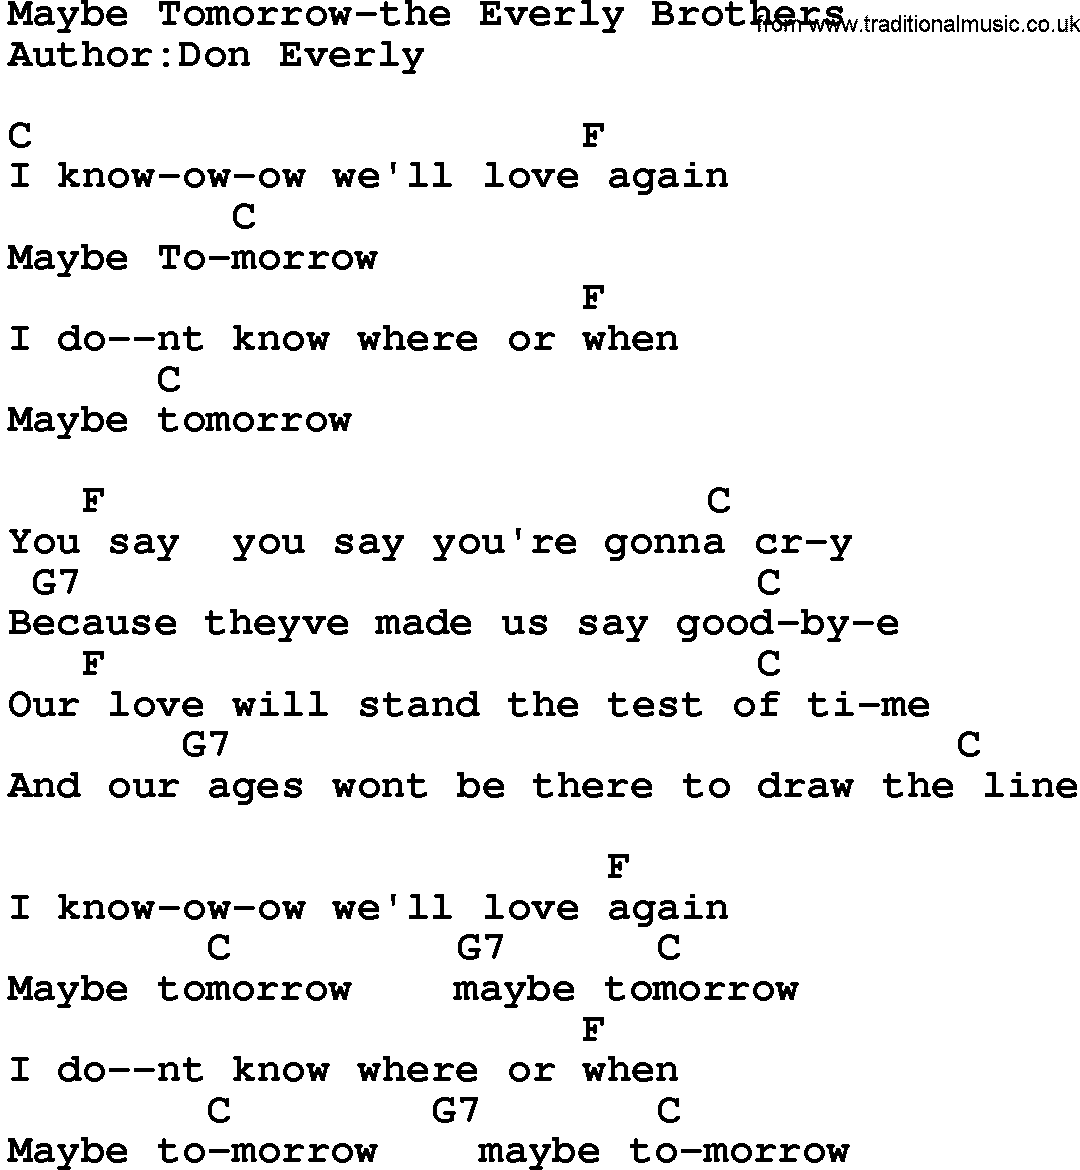 Country music song: Maybe Tomorrow-The Everly Brothers lyrics and chords